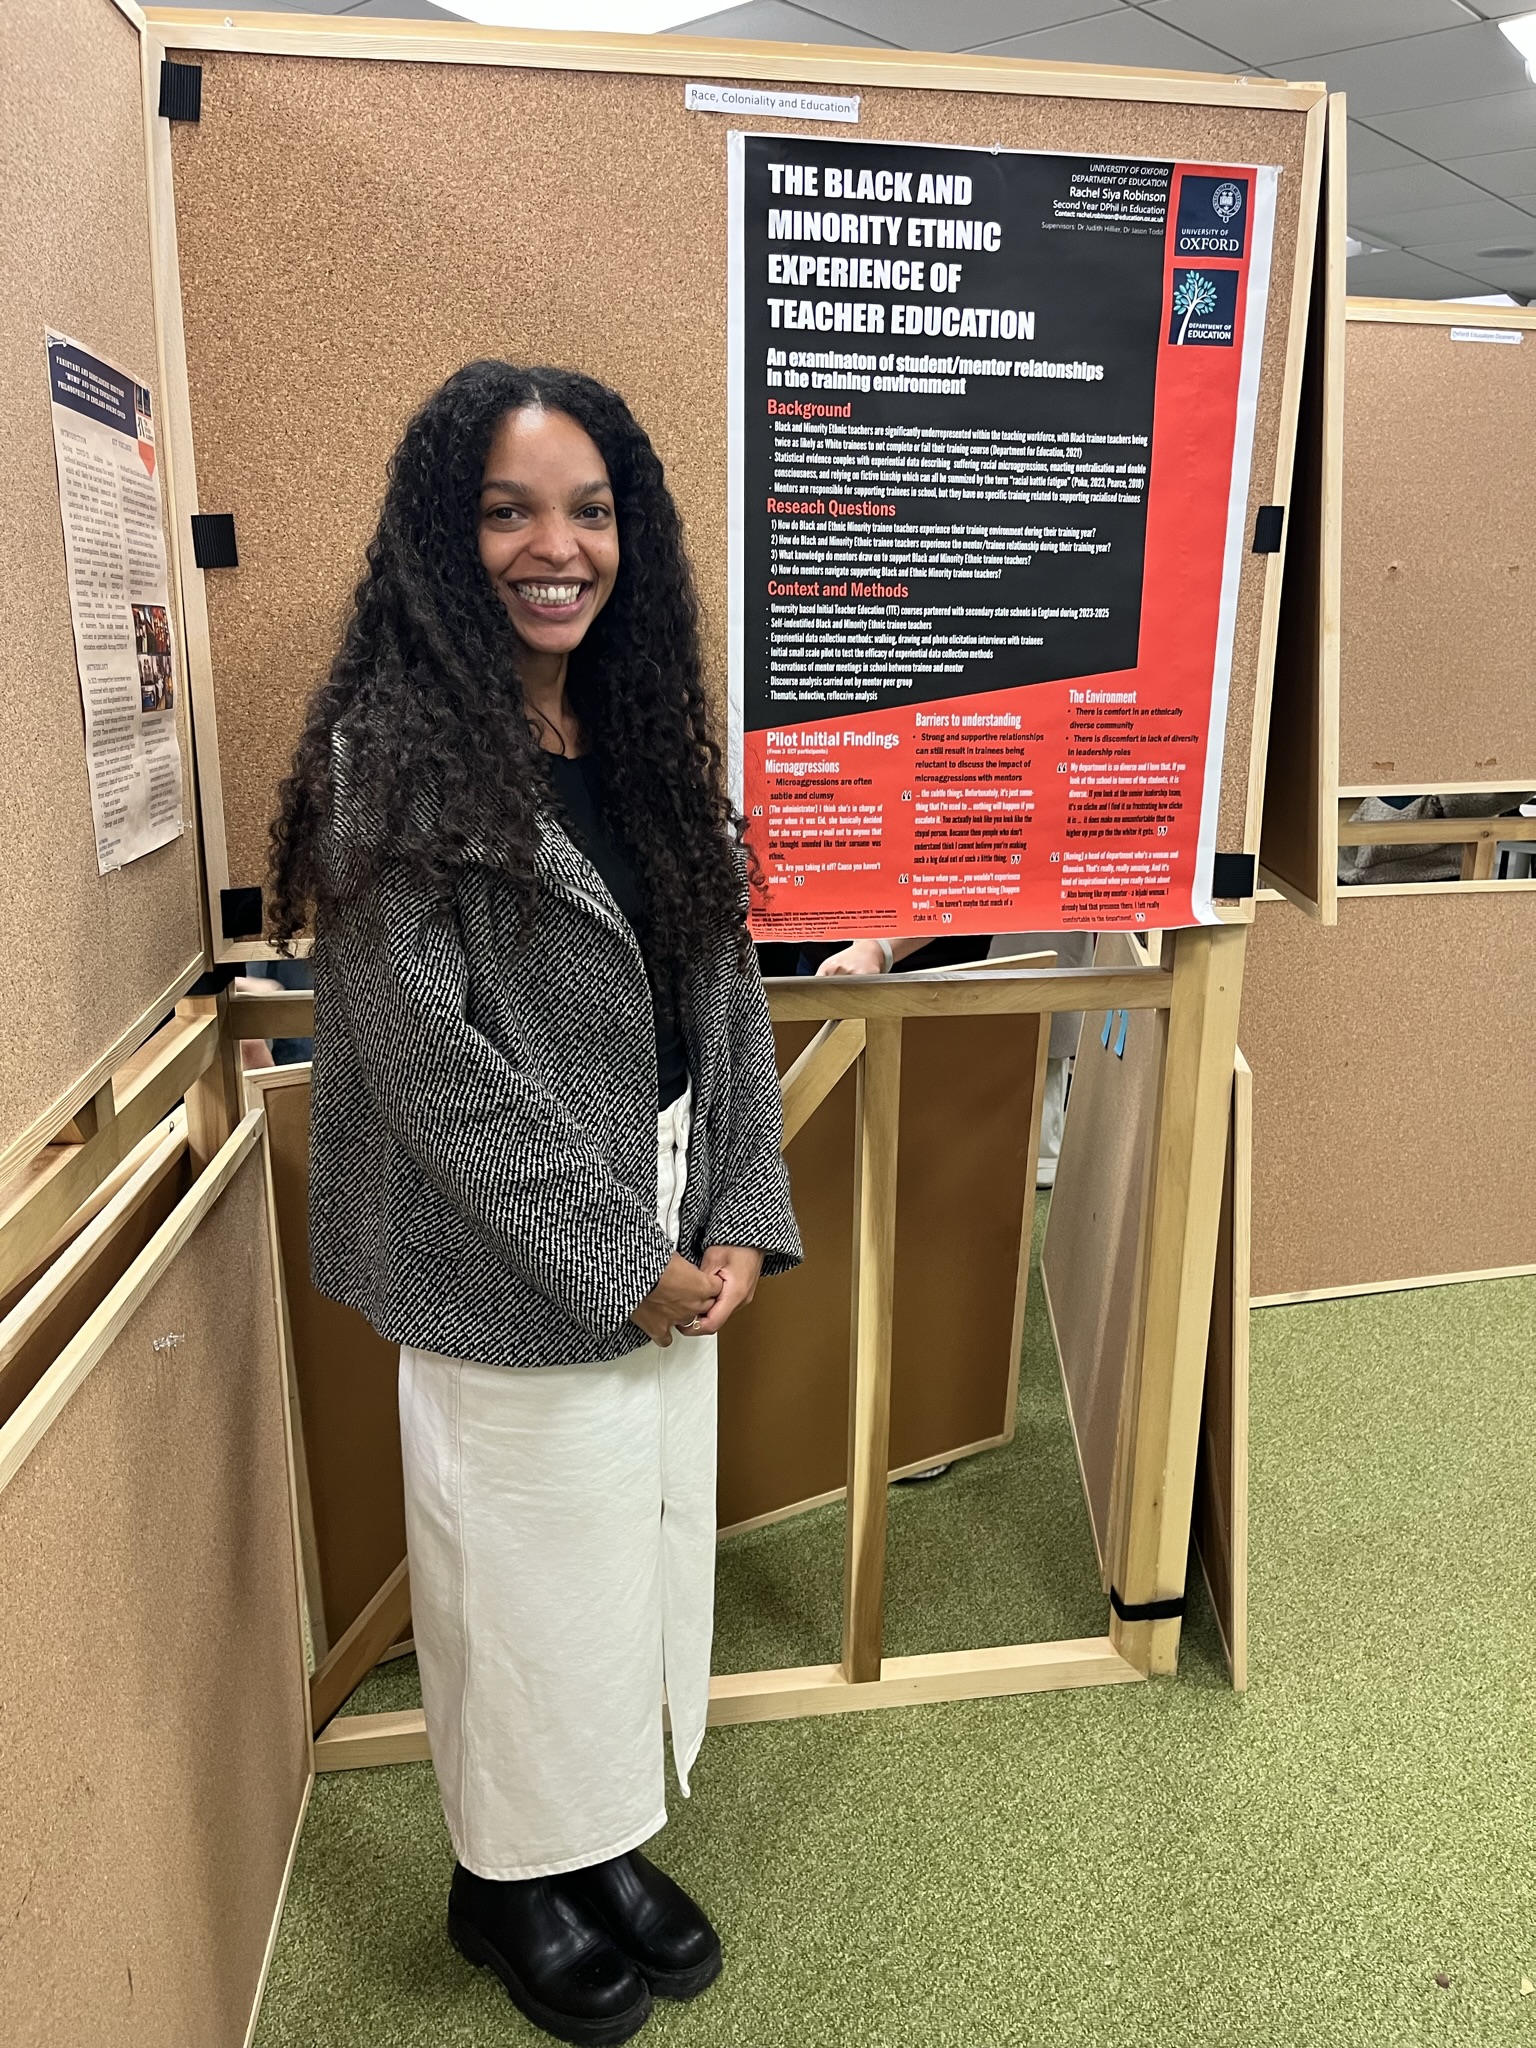 Rachel Robinson standing with poster